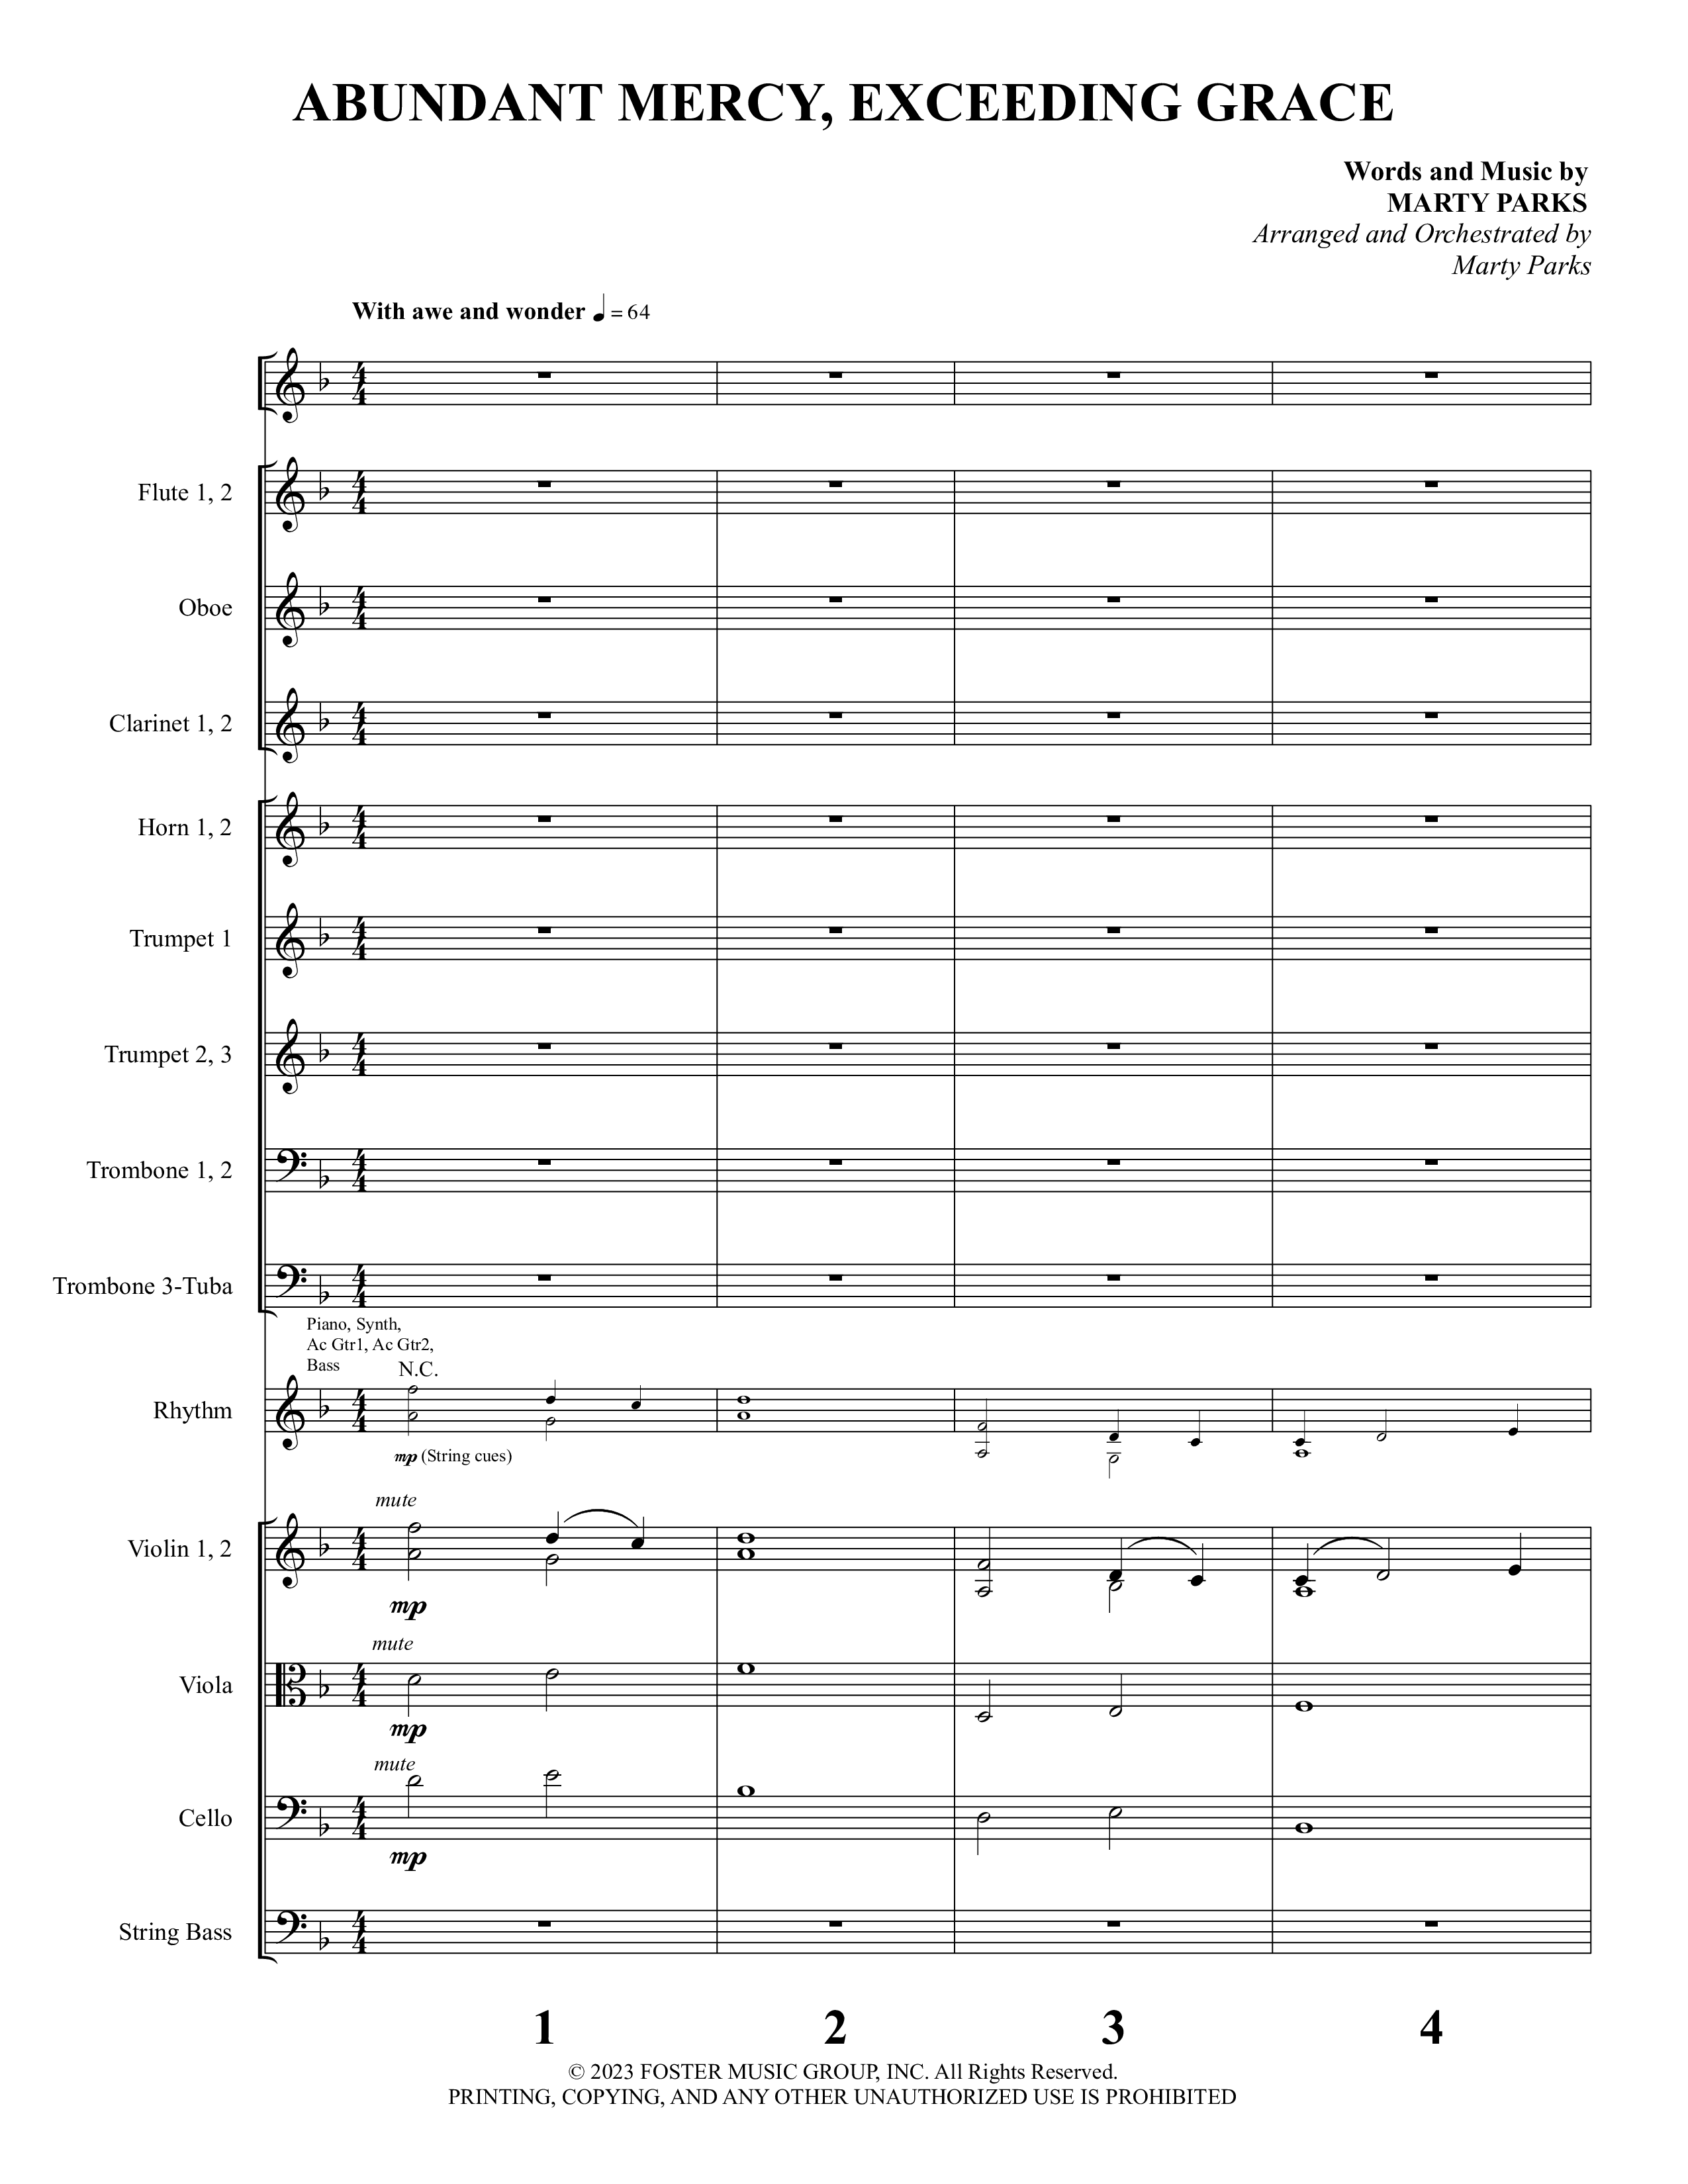 Abundant Mercy Exceeding Grace (Choral Anthem SATB) Orchestration (Foster Music Group / Arr. Marty Parks)